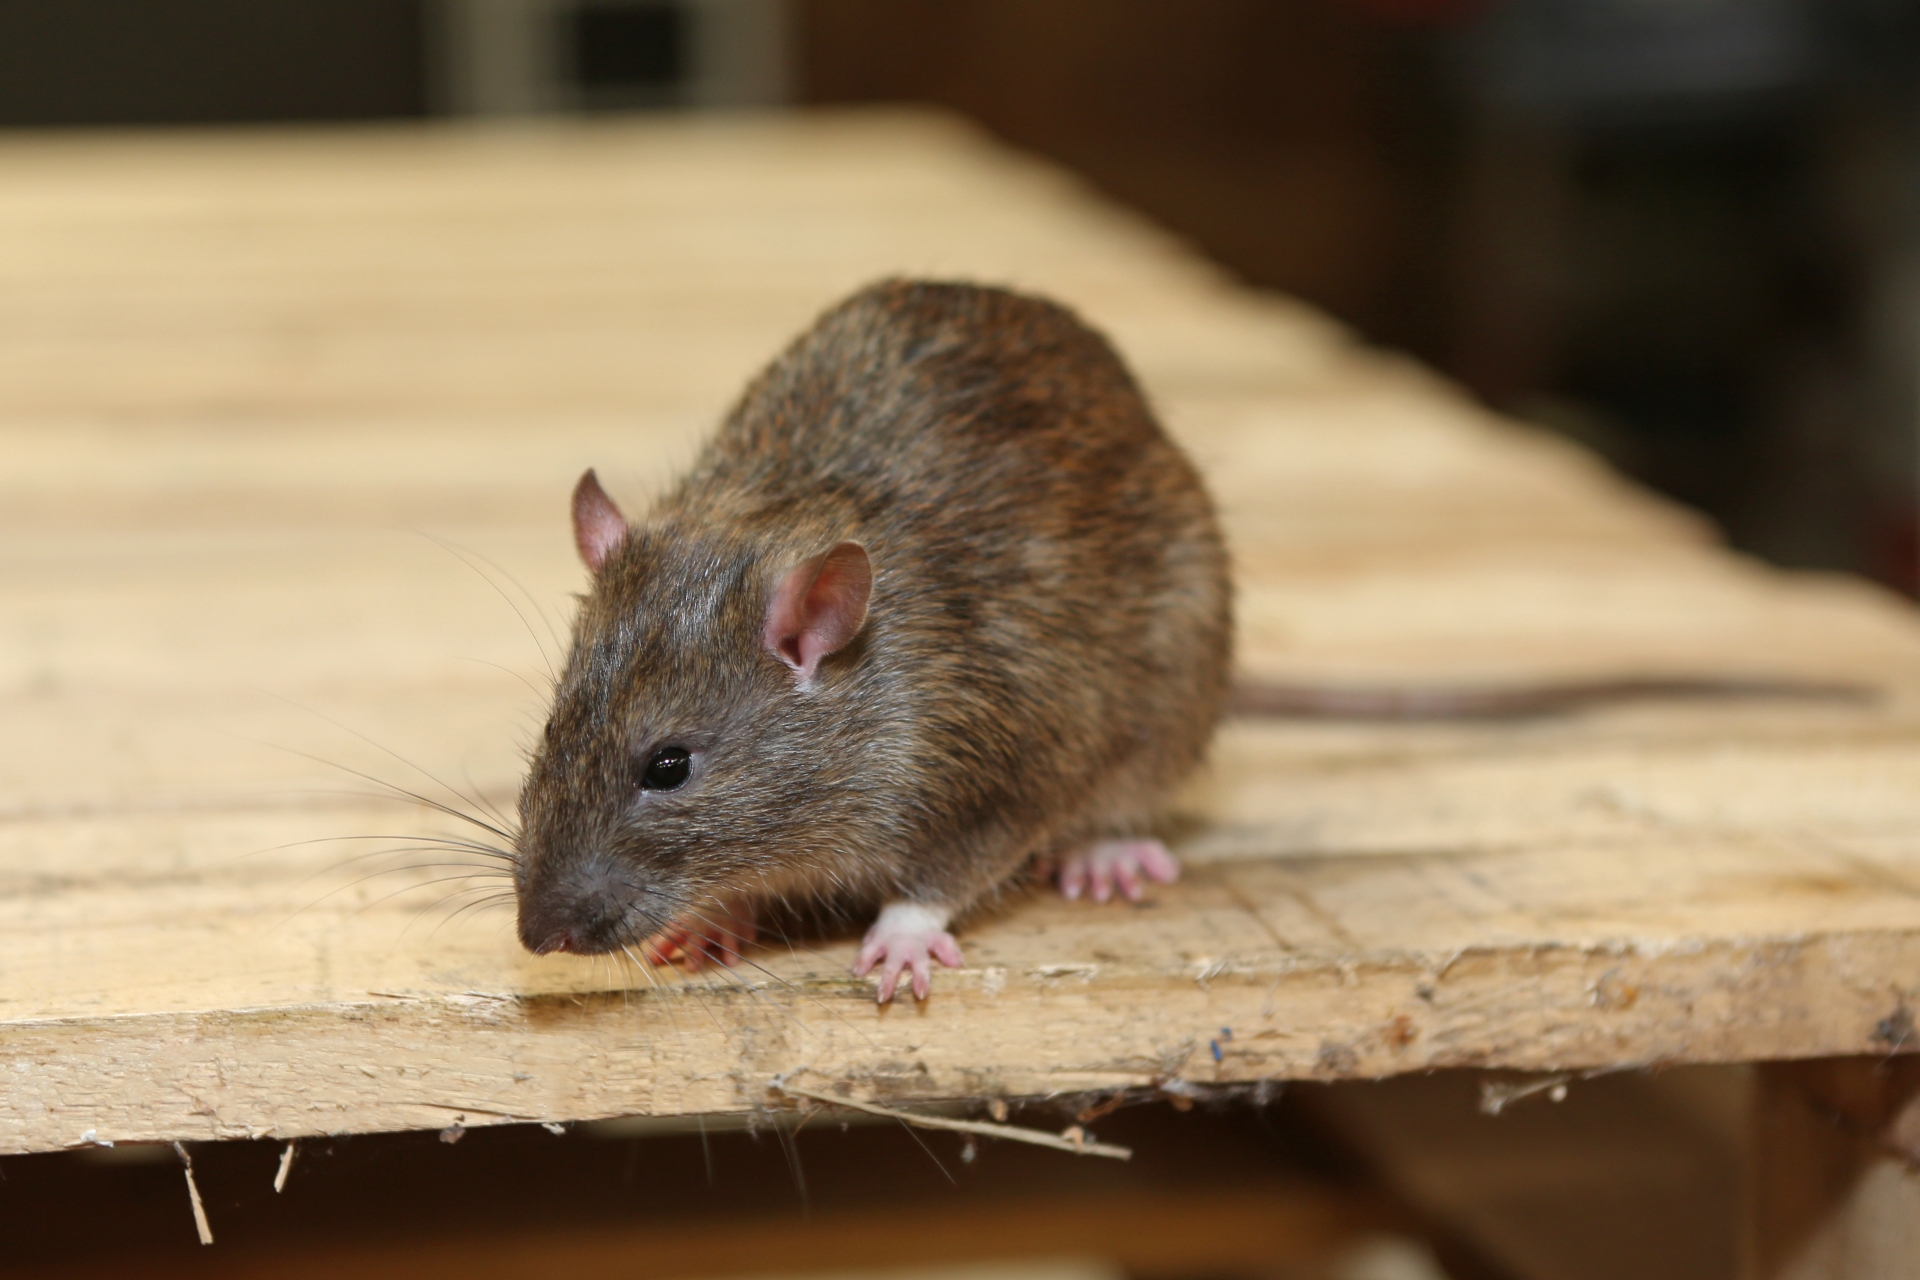 Rat Control, Pest Control in Woodford Green, Woodford, IG8. Call Now 020 8166 9746